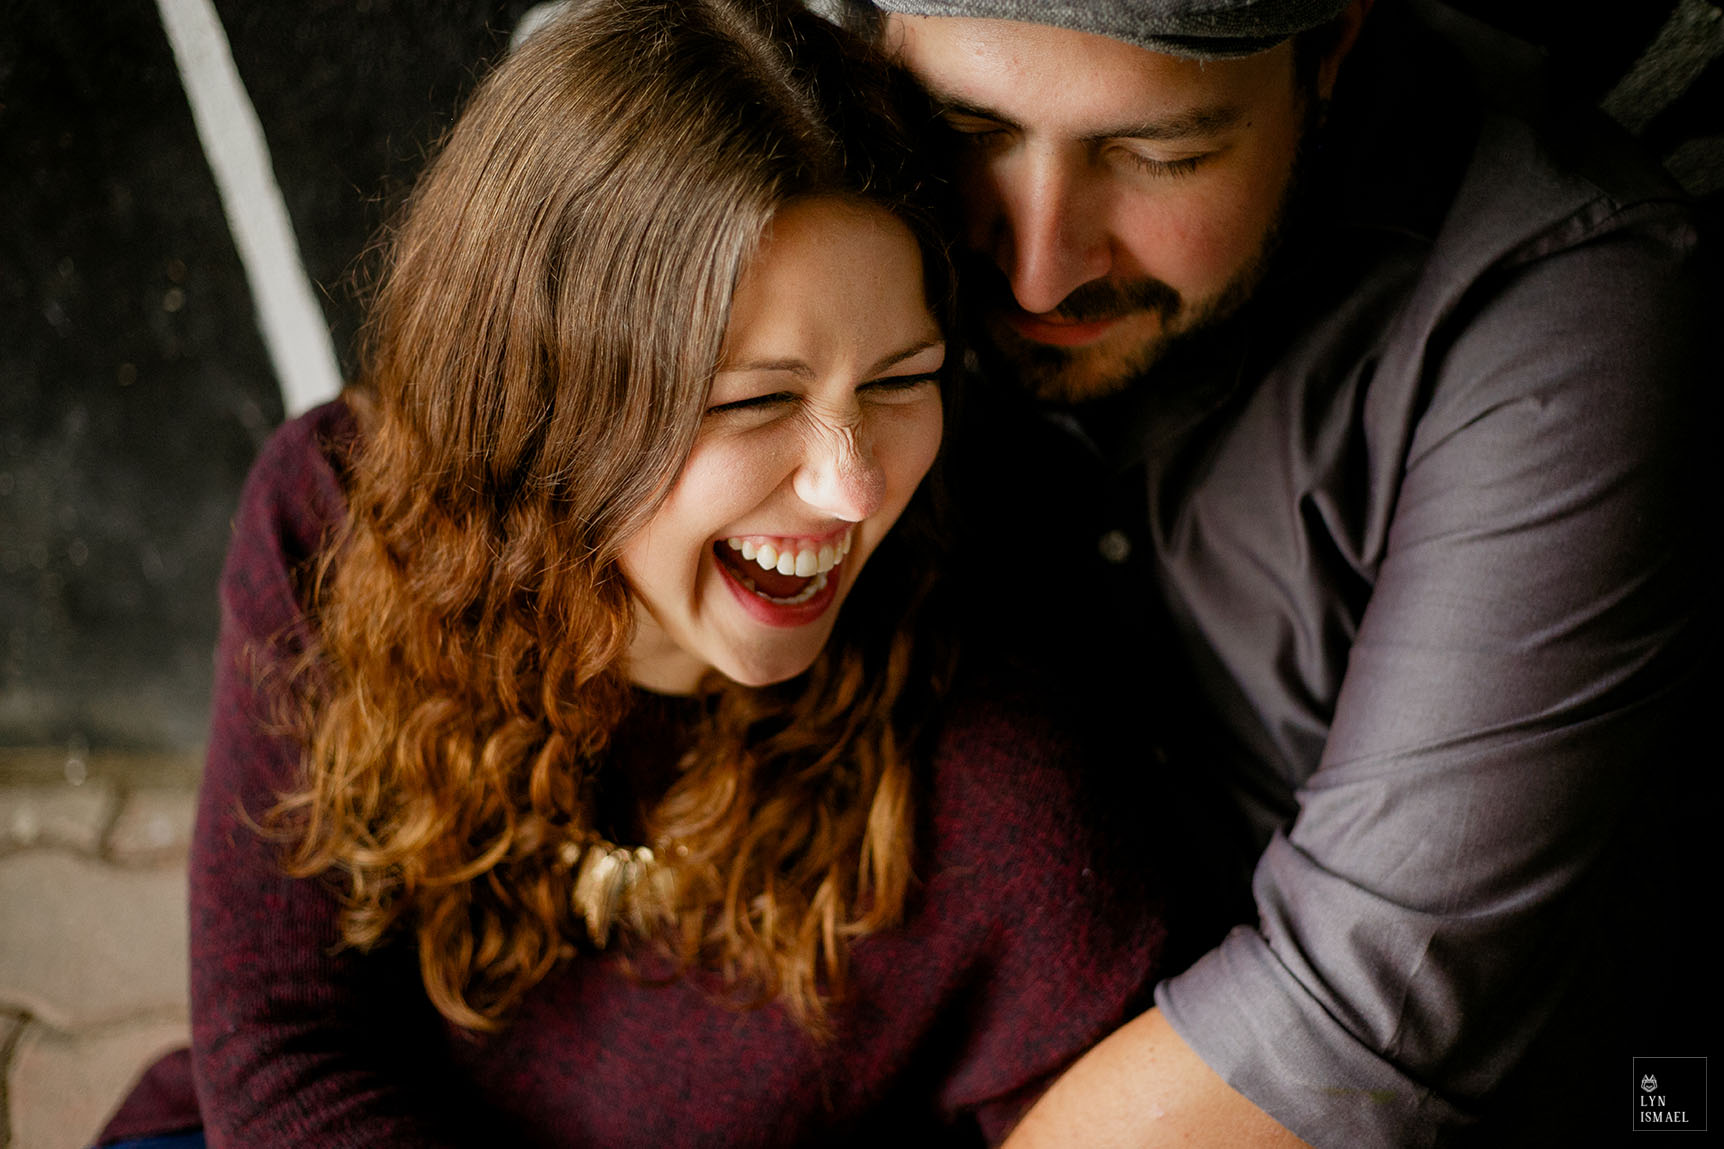 A woman laughs at her fiance's joke during their Stratford engagement session.